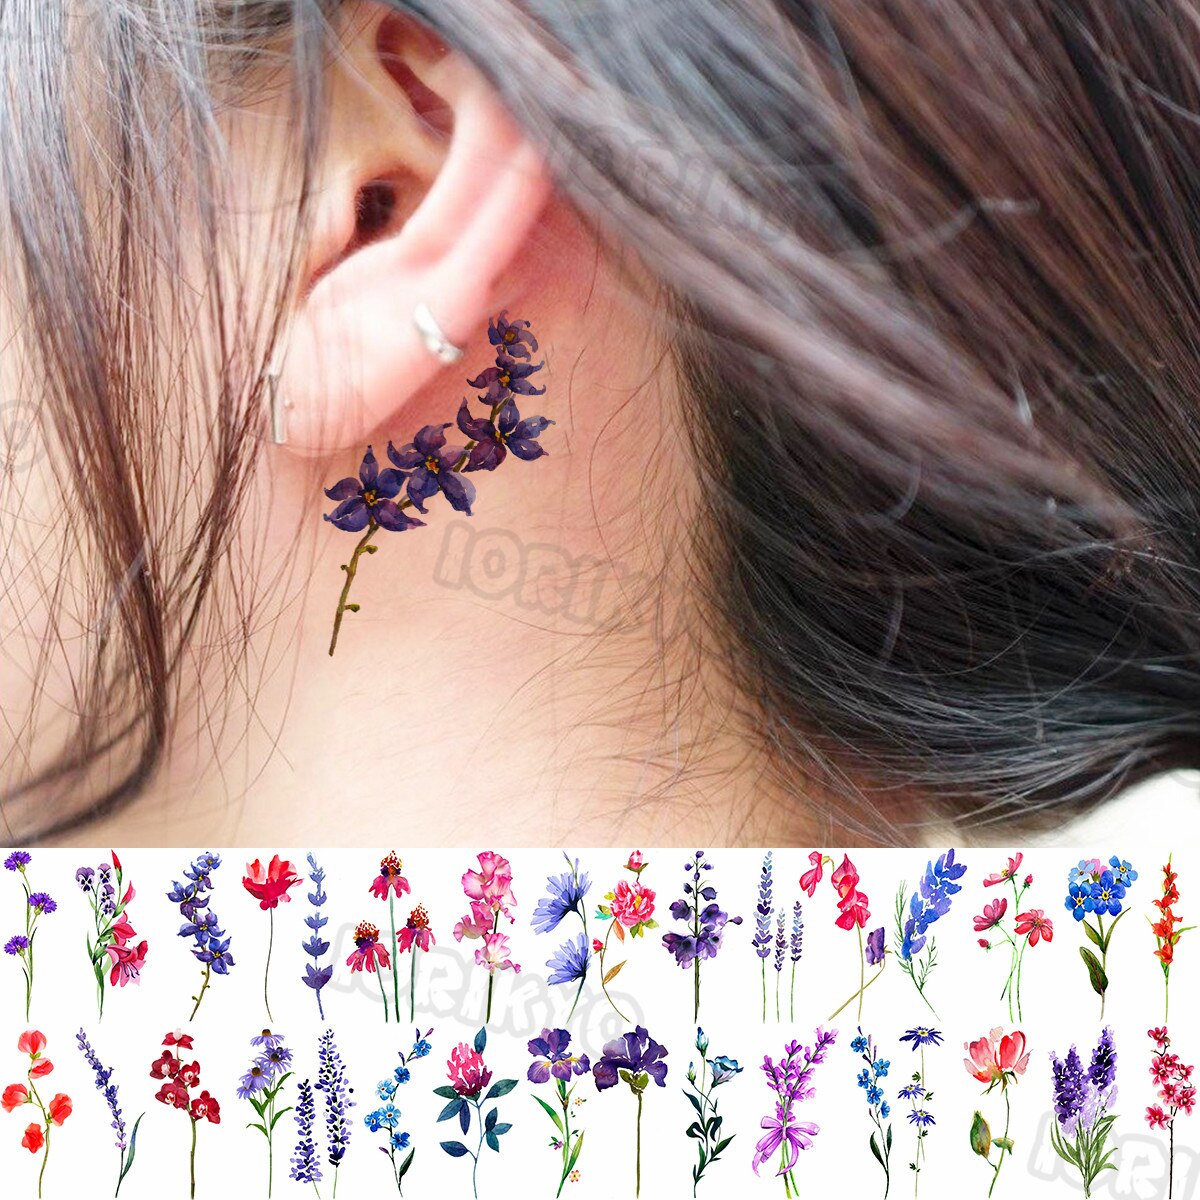 Watercolor Lavender Temporary Tattoos For Women Girls Realistic Sweet Pea Thorns Fake Tattoo Sticker Ear Neck Tatoos Hot Sale